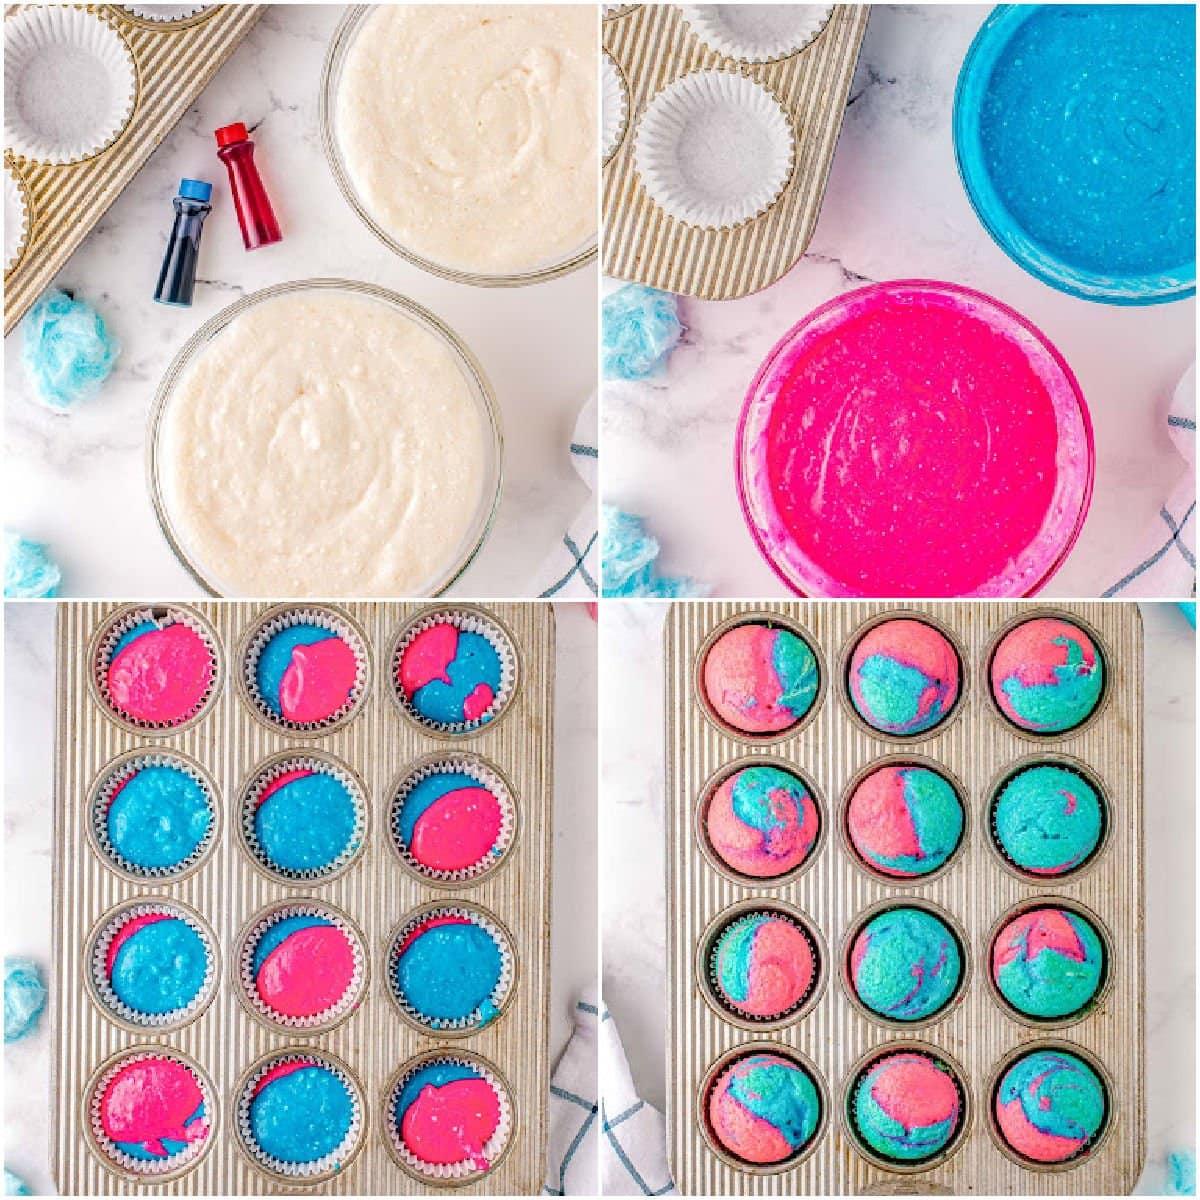 four image collage showing how to make swirled cupcakes using a cake mix.